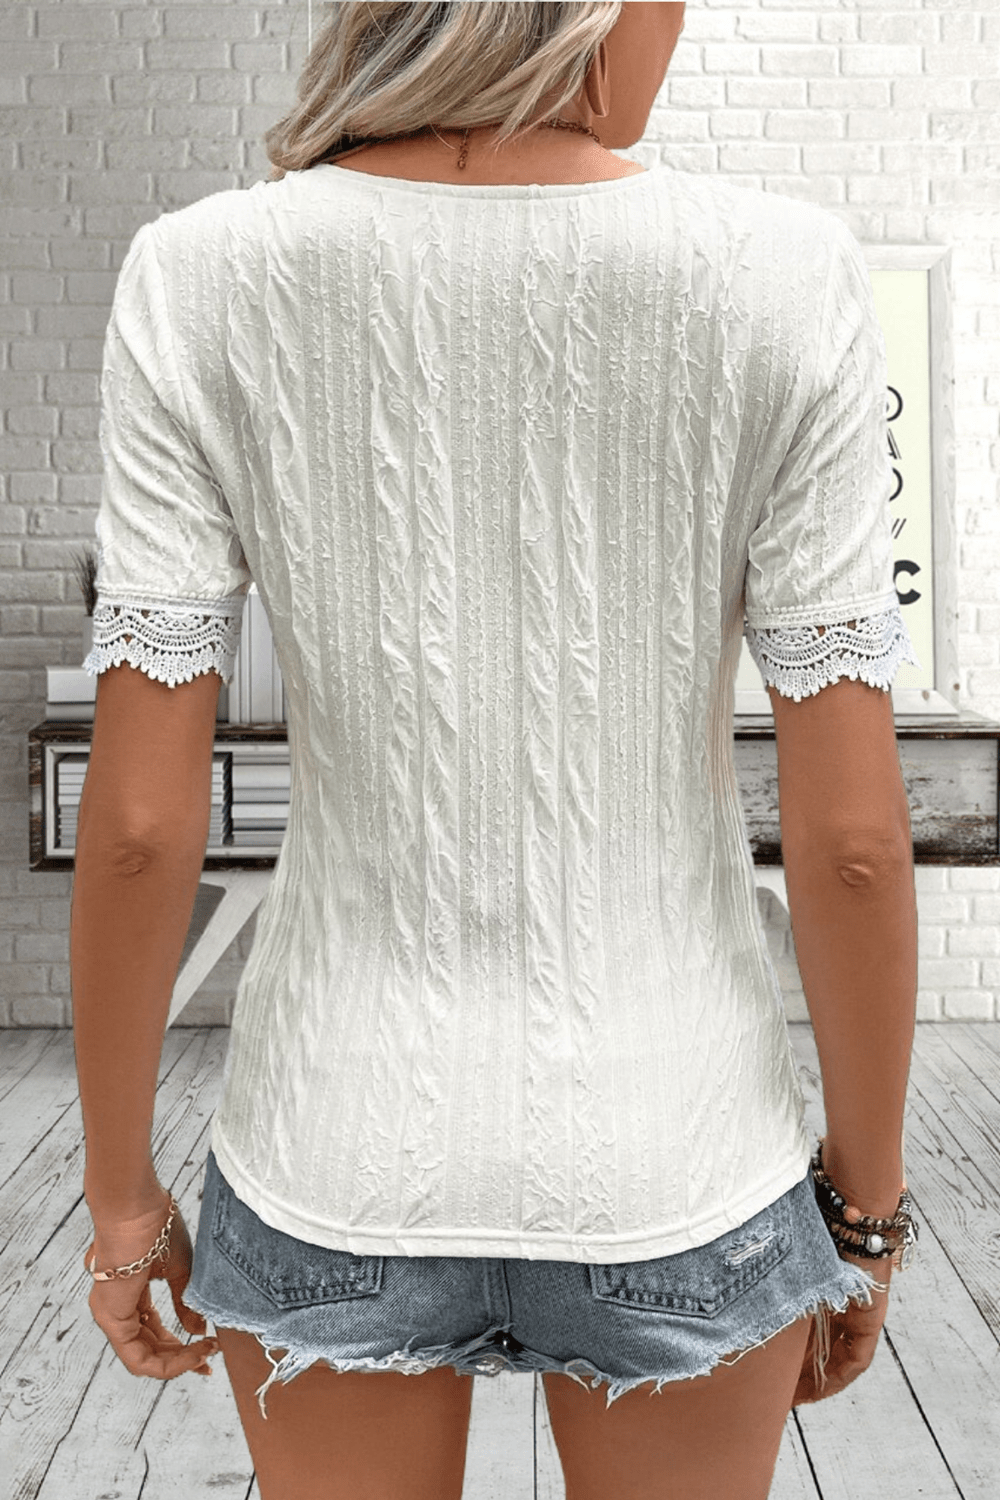 Buttoned V-Neck Lace Trim T-Shirt - Kawaii Stop - Chic V-Neck T-Shirt, Cropped Length, Decorative Buttons, J&Y, Lace Trim, Ship From Overseas, Shipping Delay 09/29/2023 - 10/03/2023, Stylish Solid Pattern, T-Shirt, T-Shirts, Tee, Women's Clothing, Women's Fashion, Women's Top